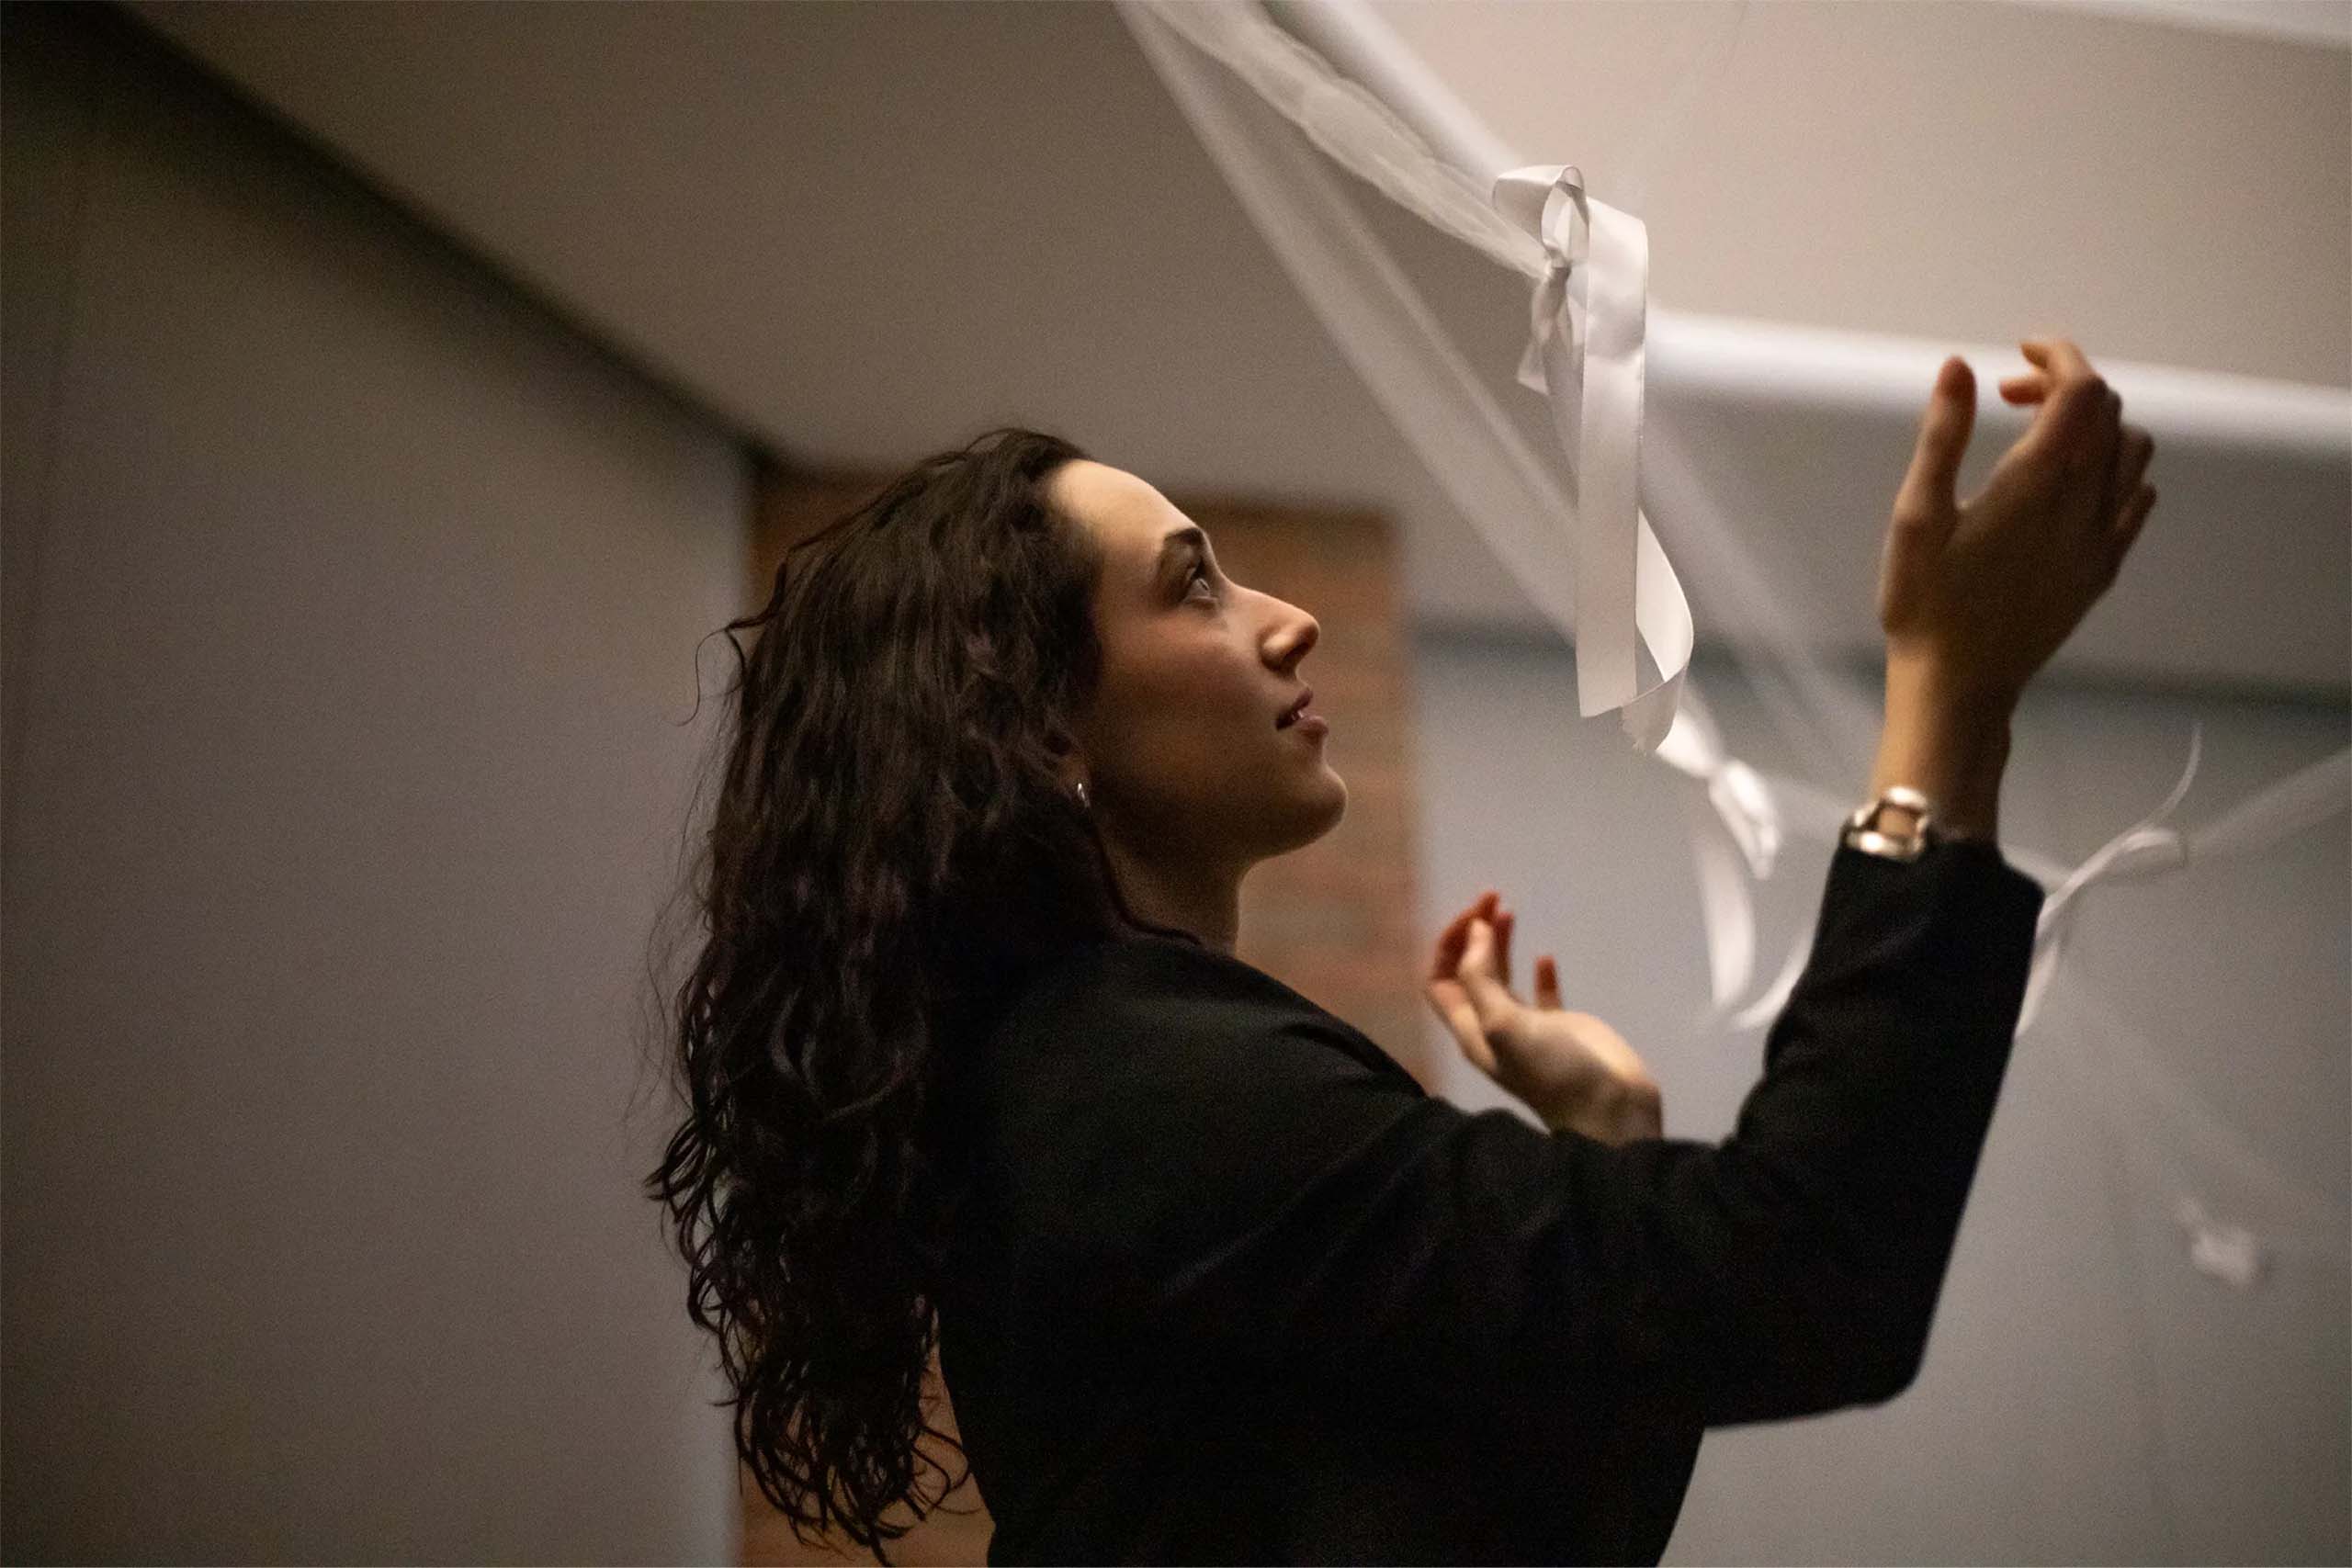 Rileigh Goldsmith works on a hanging installation, wearing a black sweater